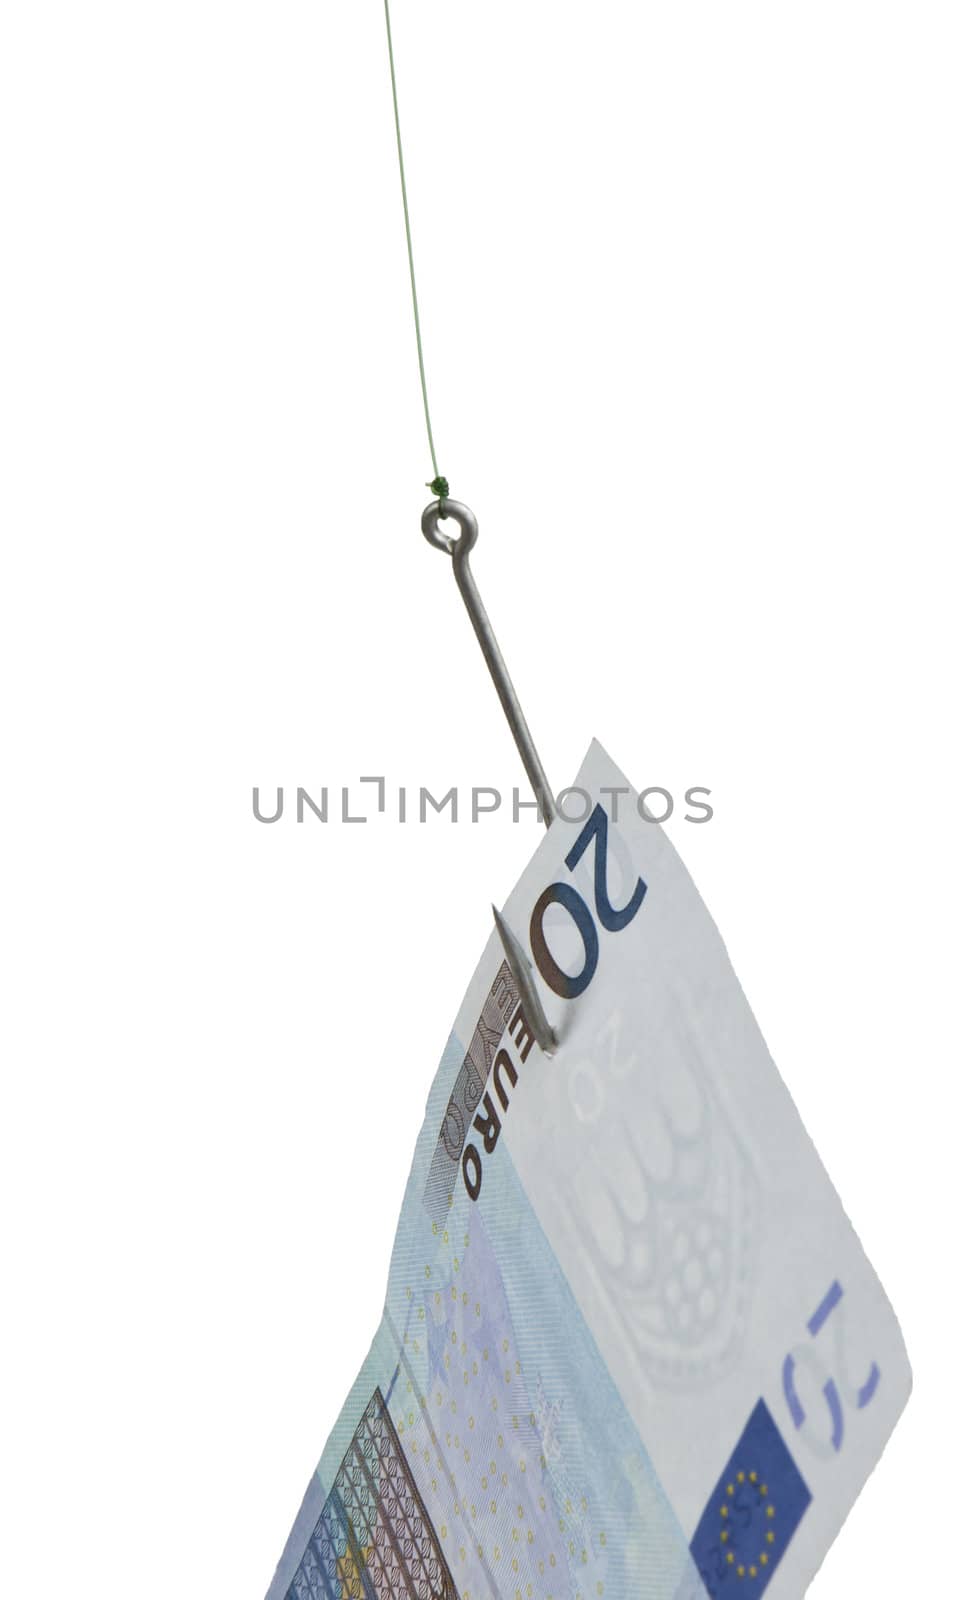 stealing money with hook - vertical image isolated on white